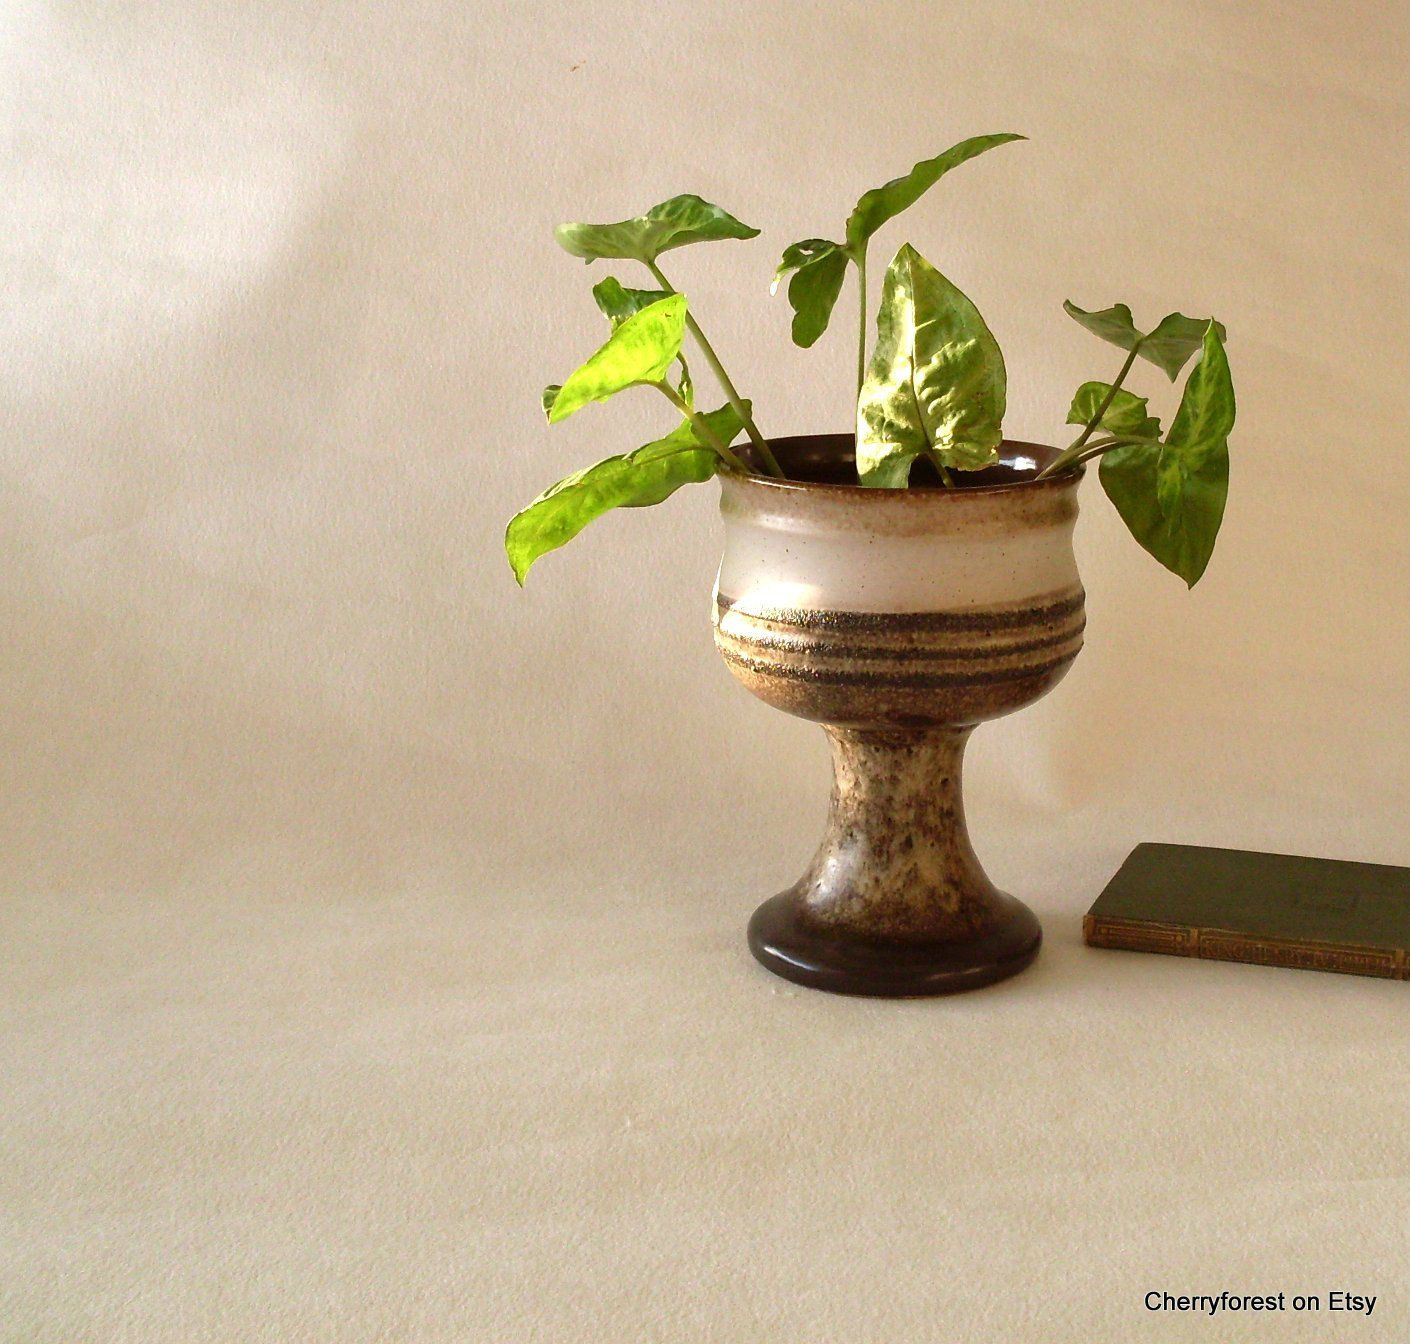 28 Fantastic Natural Stone Vase 2024 free download natural stone vase of goblet planter by strehla in stone colored glaze with pumice decor in goblet planter by strehla in stone colored glaze wit pumice decor vintage east german indoor plant